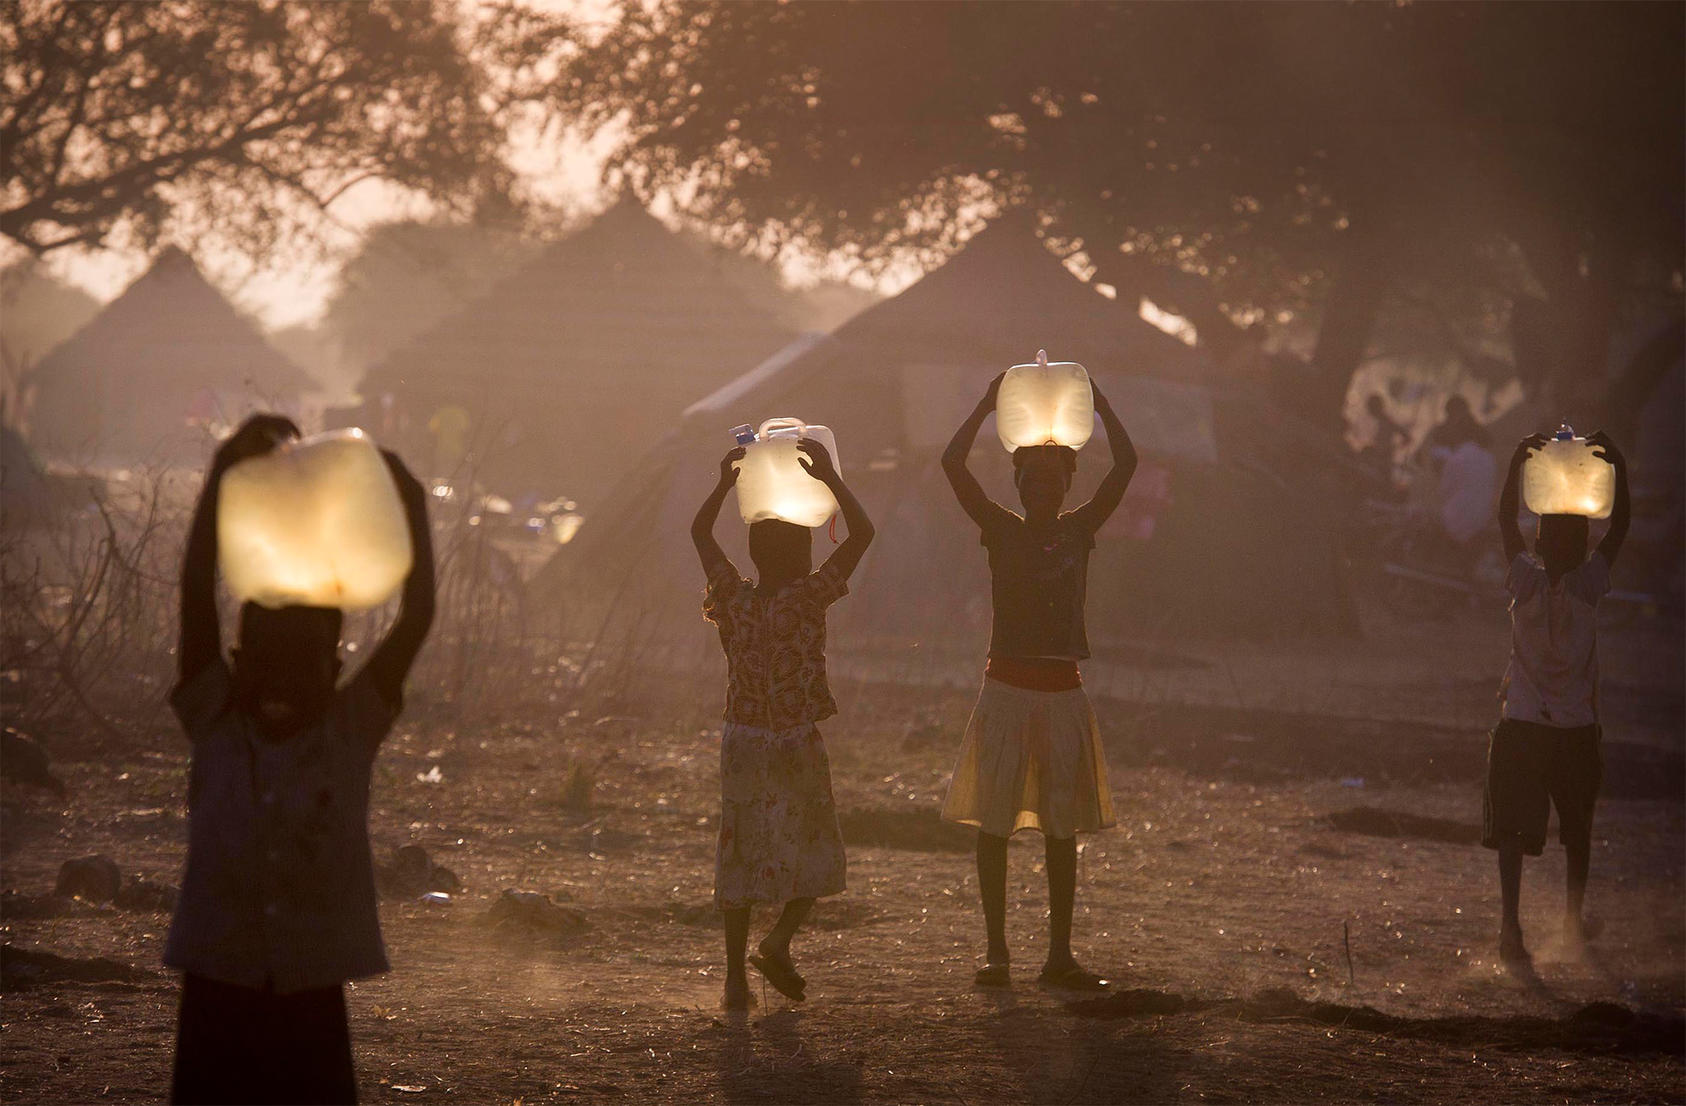 South Sudanese children carry water for their families at sunset in a camp for people displaced by warfare. About 39 percent of South Sudan’s 11 million people have been uprooted amid the country’s violence. (www.geoffpugh.com/Flickr)